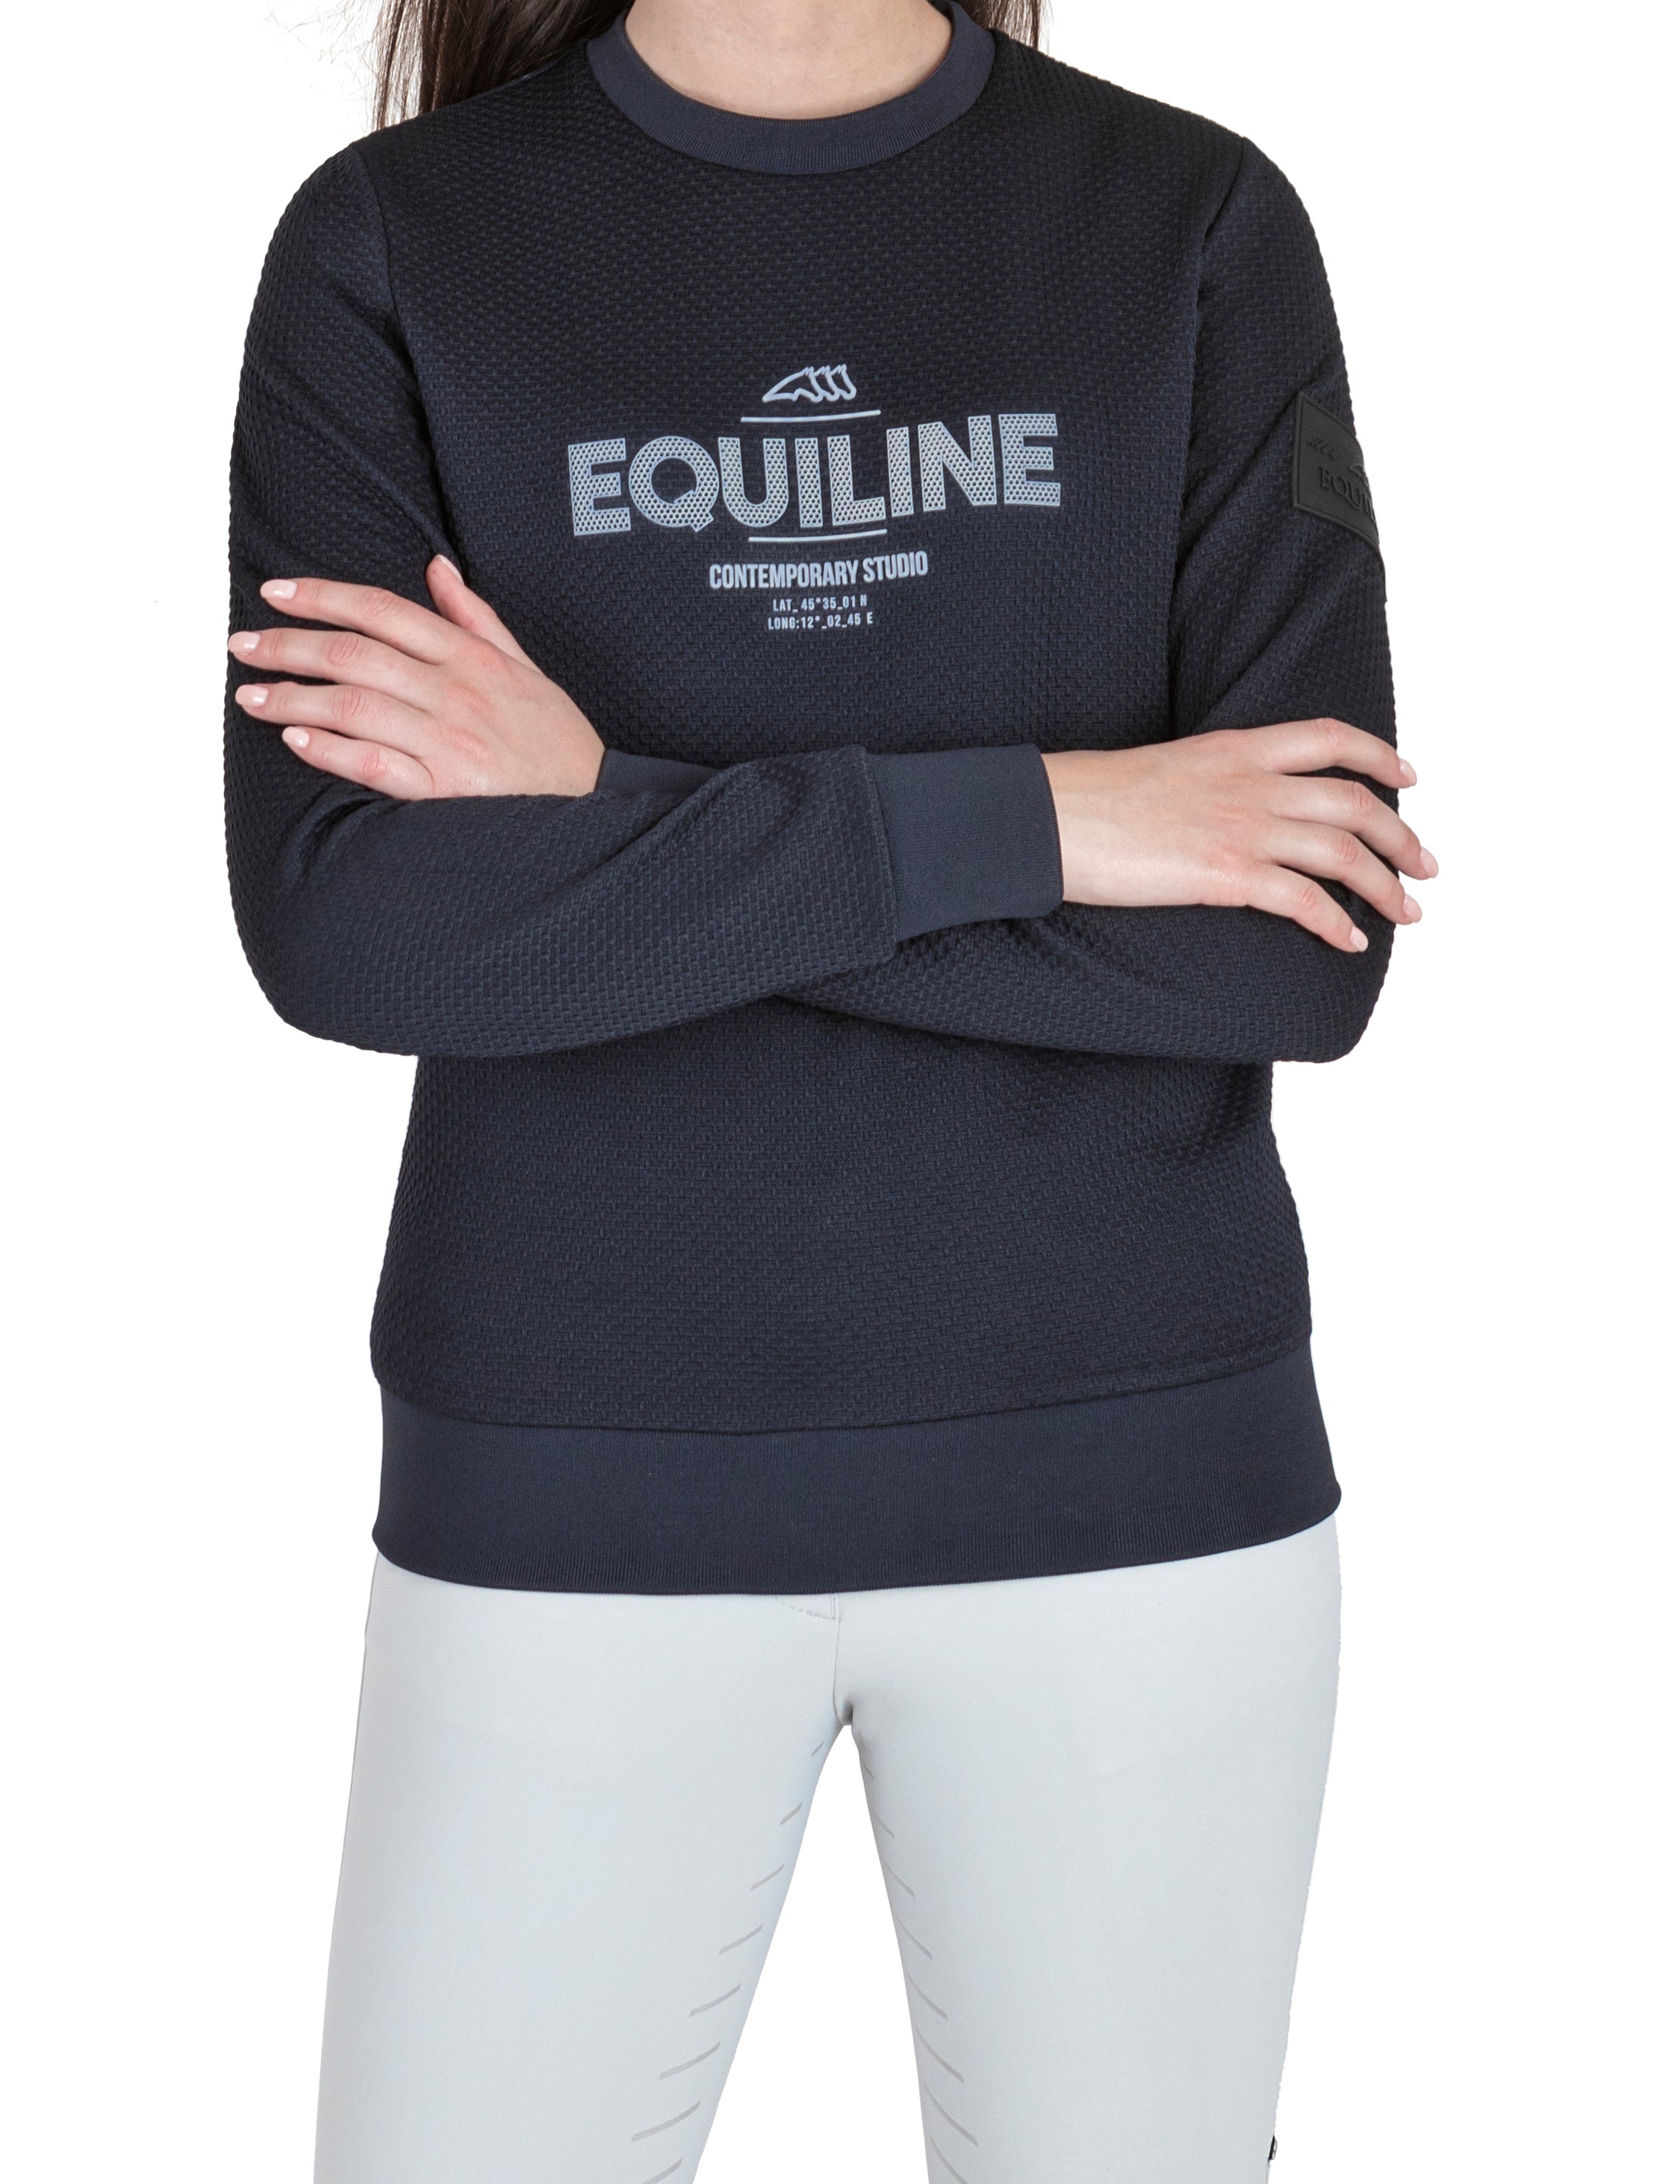 Equilinecamiliacpullover1.jpg